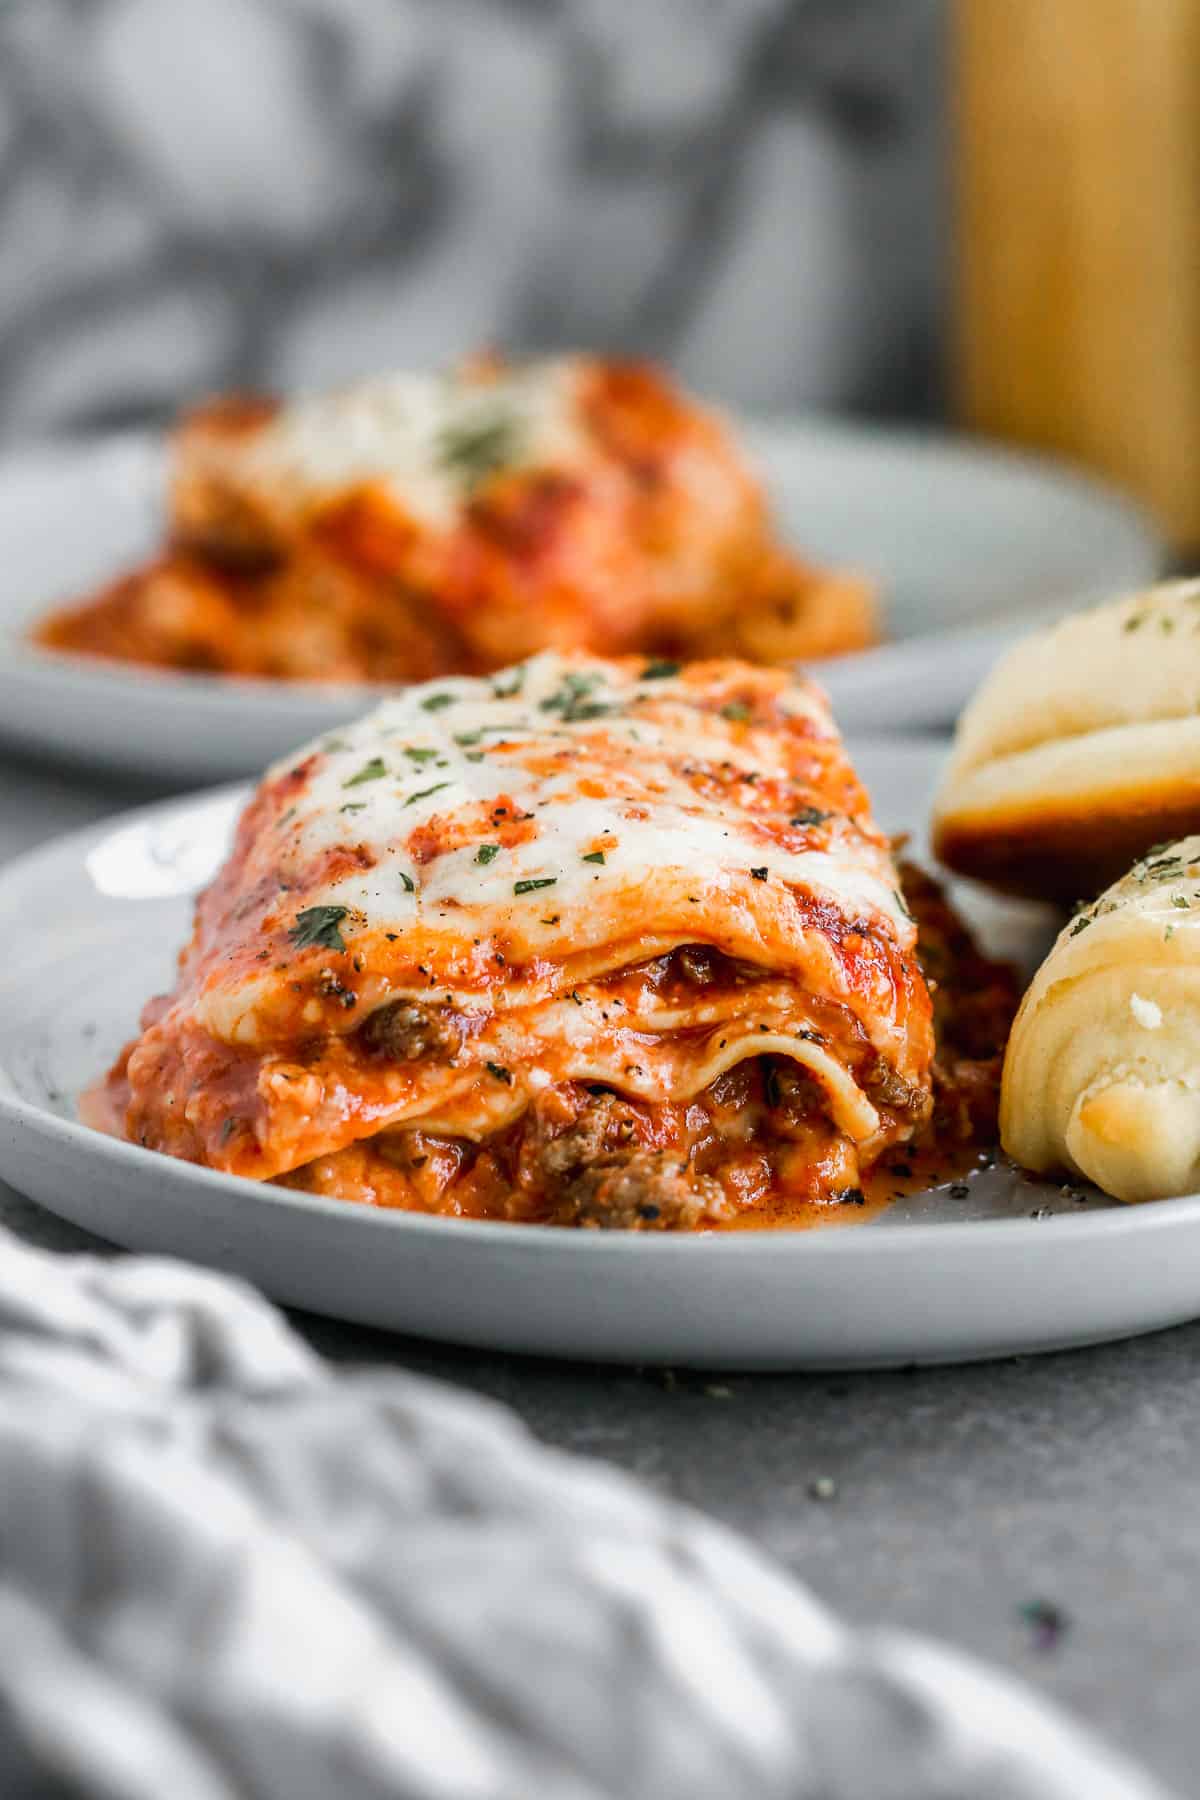 A piece of an easy slow cooker lasagna recipe on a white plate with some garlic knots, ready to enjoy.